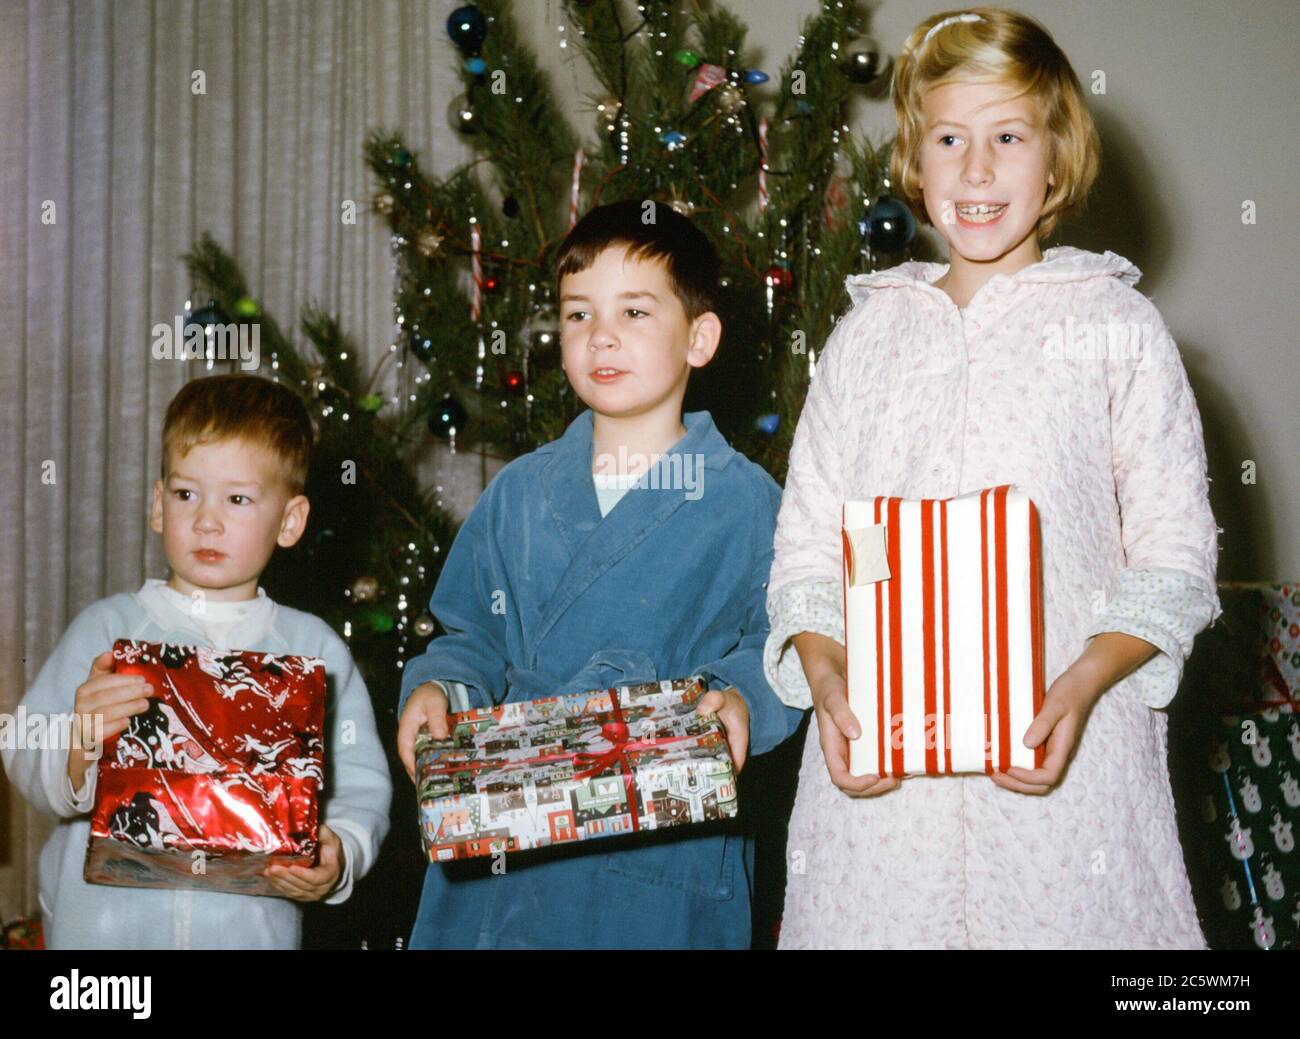 Three young children, siblings comprising a 7 year old girl, 5 year old boy and 3 year old boy, in pyjamas and dressing gowns holding Christmas presents in front of a Christmas tree on Christmas morning in USA in the  1960s Stock Photo